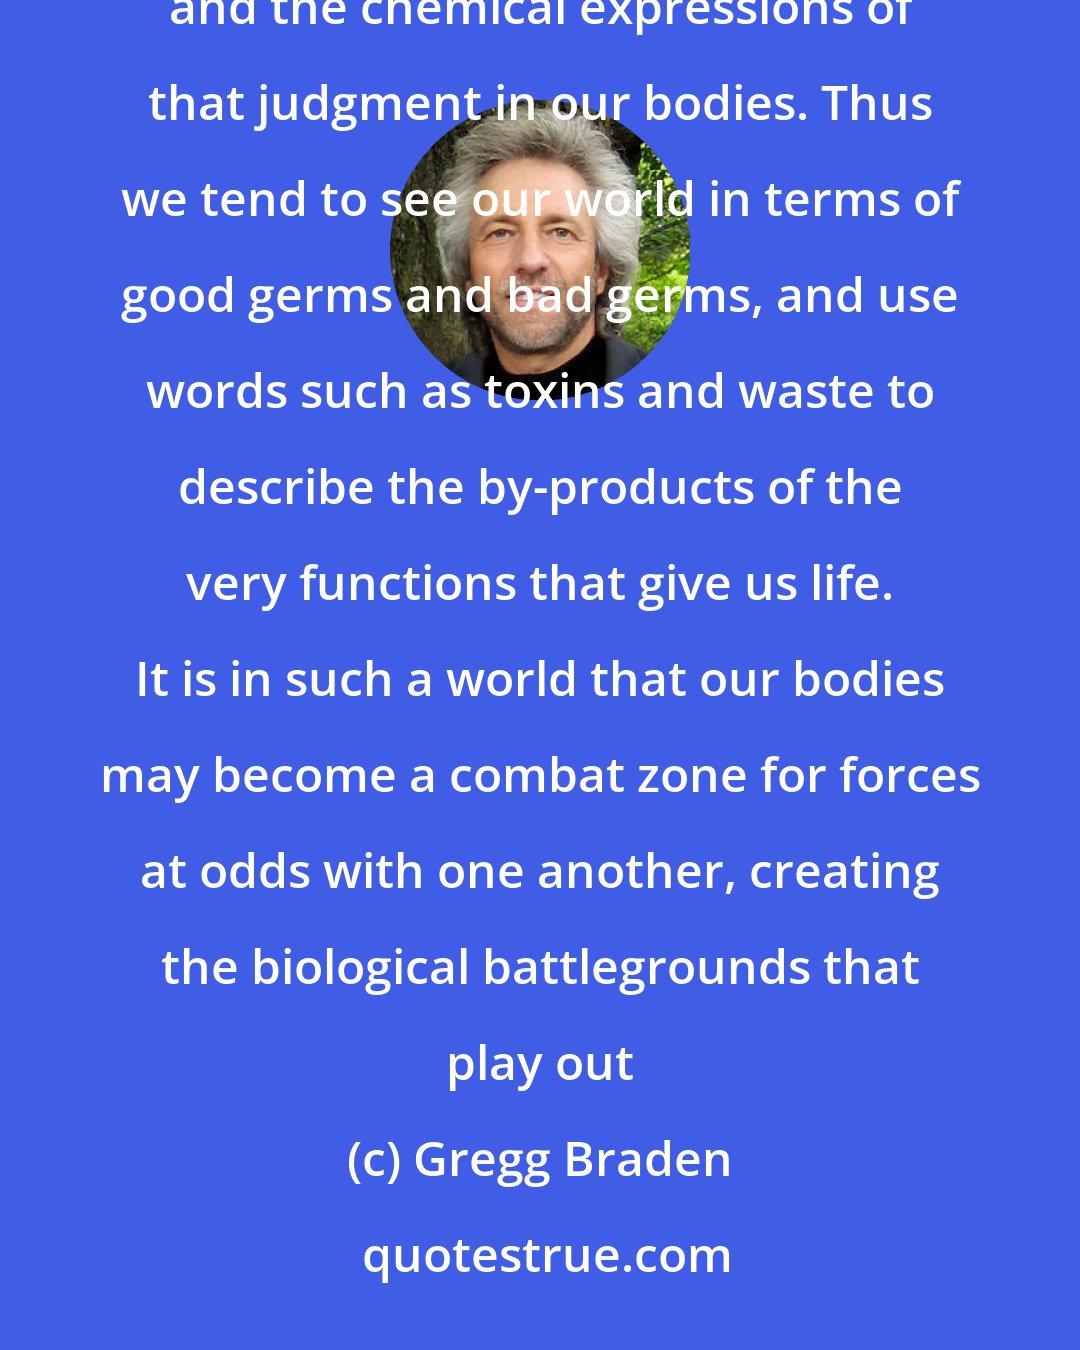 Gregg Braden: Living as if the world out there were somehow separate from us opens the door to the belief system of judgement and the chemical expressions of that judgment in our bodies. Thus we tend to see our world in terms of good germs and bad germs, and use words such as toxins and waste to describe the by-products of the very functions that give us life. It is in such a world that our bodies may become a combat zone for forces at odds with one another, creating the biological battlegrounds that play out